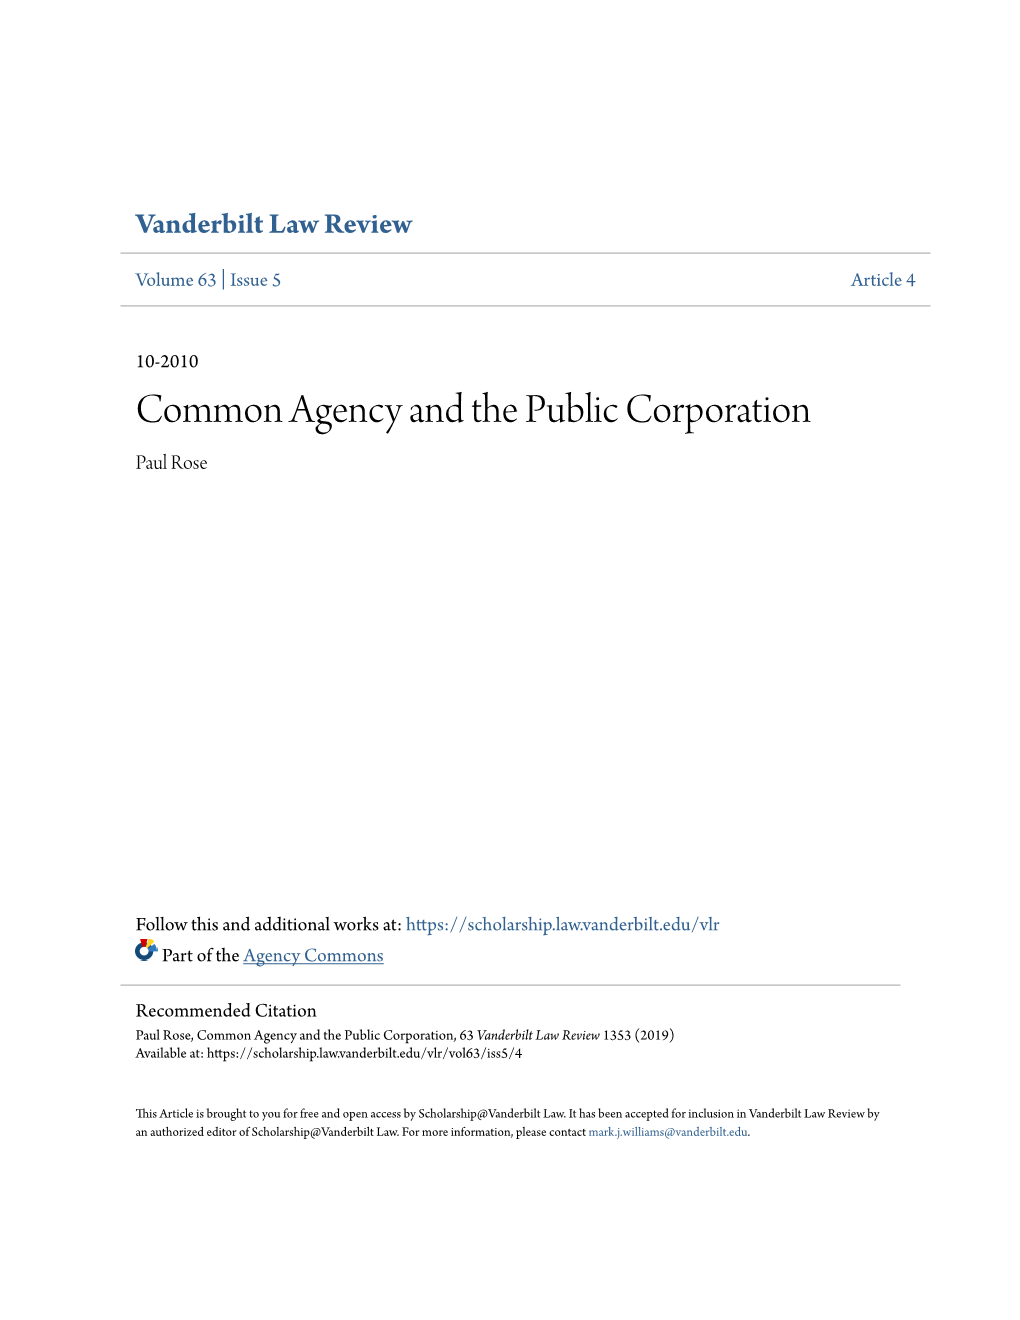 Common Agency and the Public Corporation Paul Rose